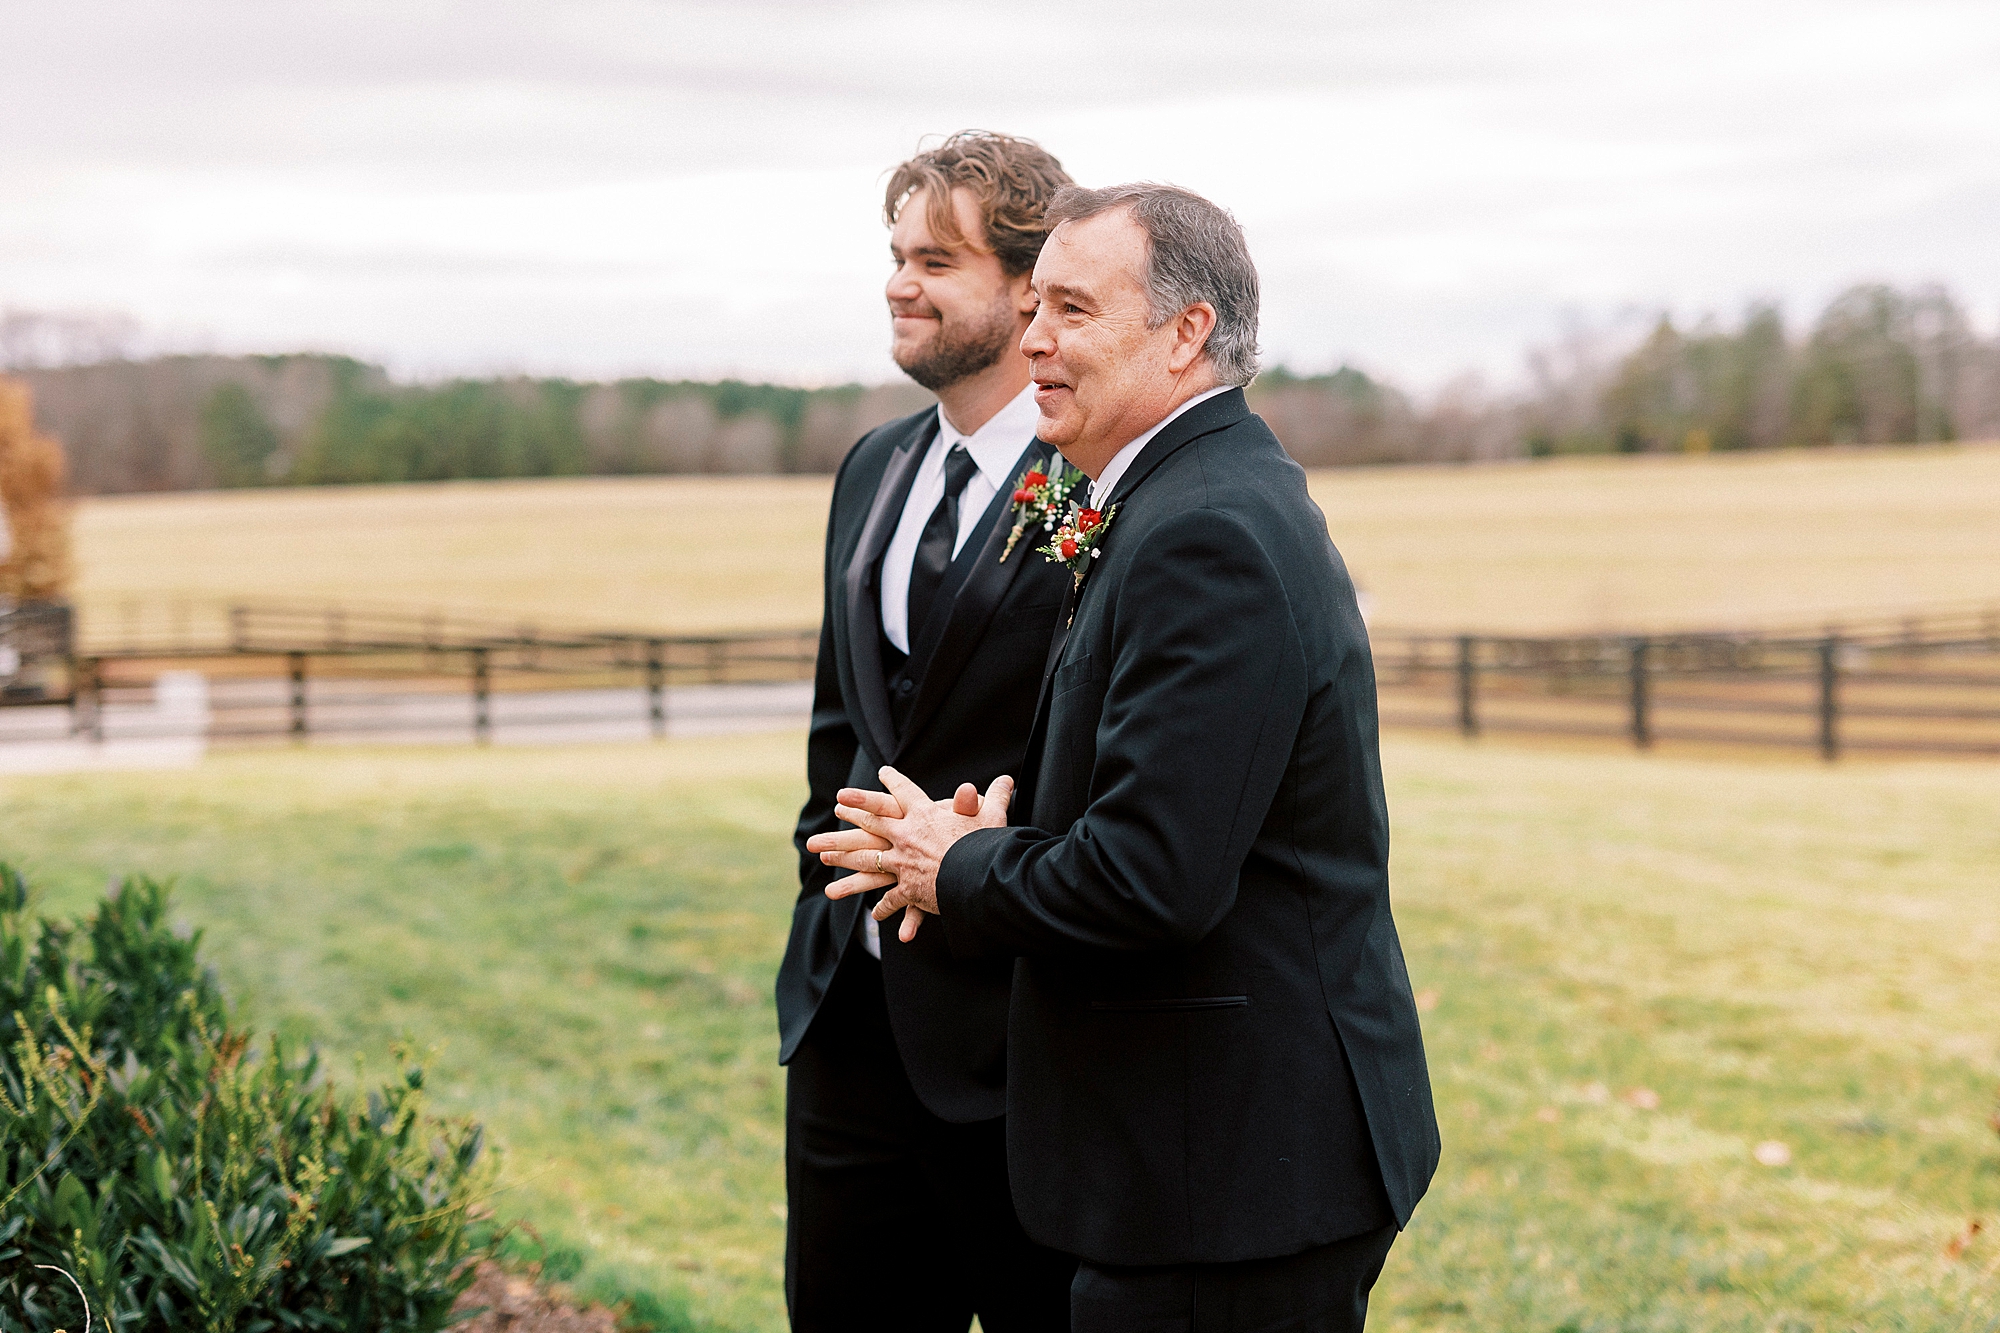 father and groomsman talk before wedding at farm